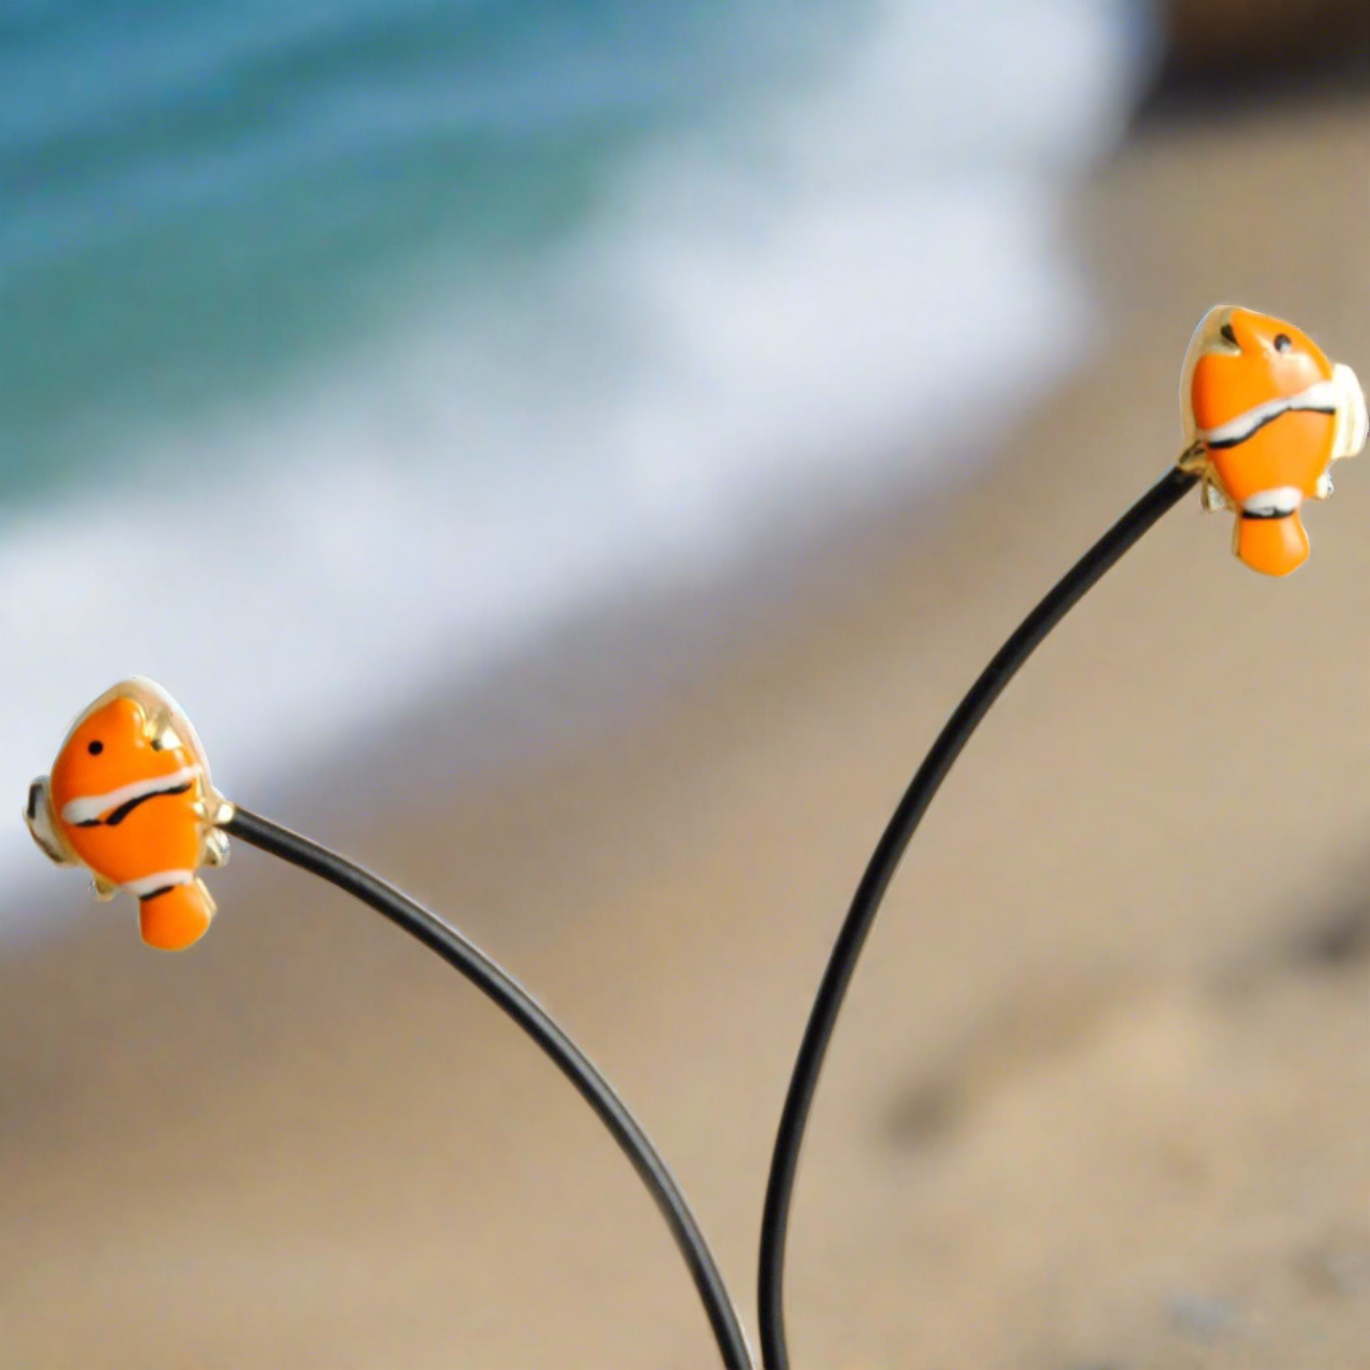 18K gold earrings feature a playful fish-nemo adorned with vibrant enamel